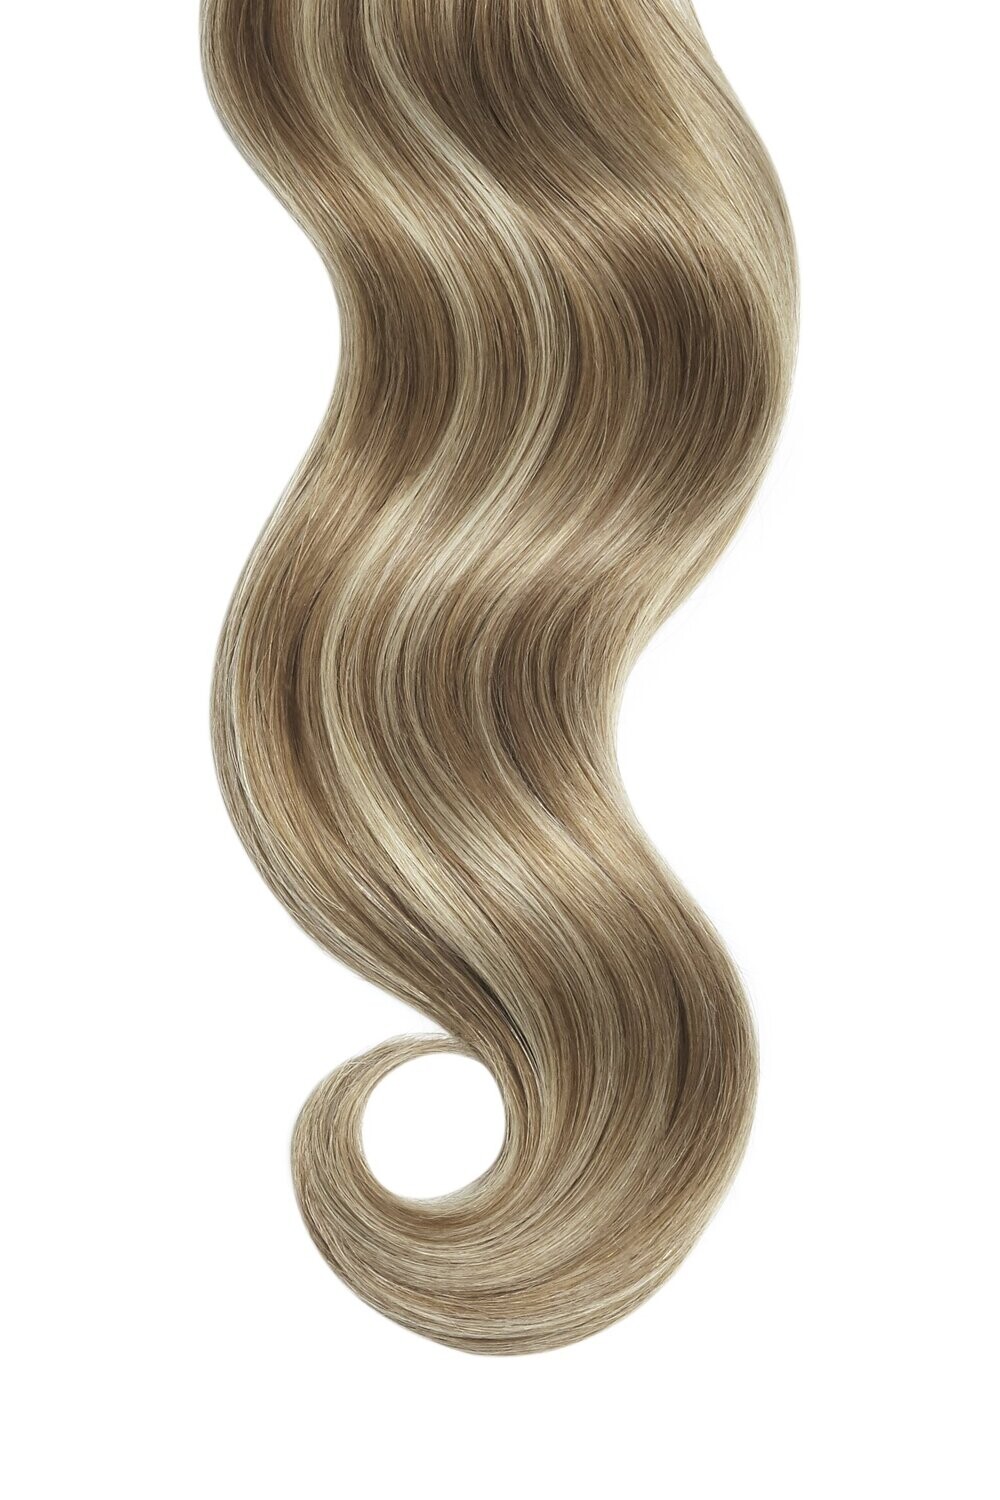 Curly Keratin Extensions Tips #6.613